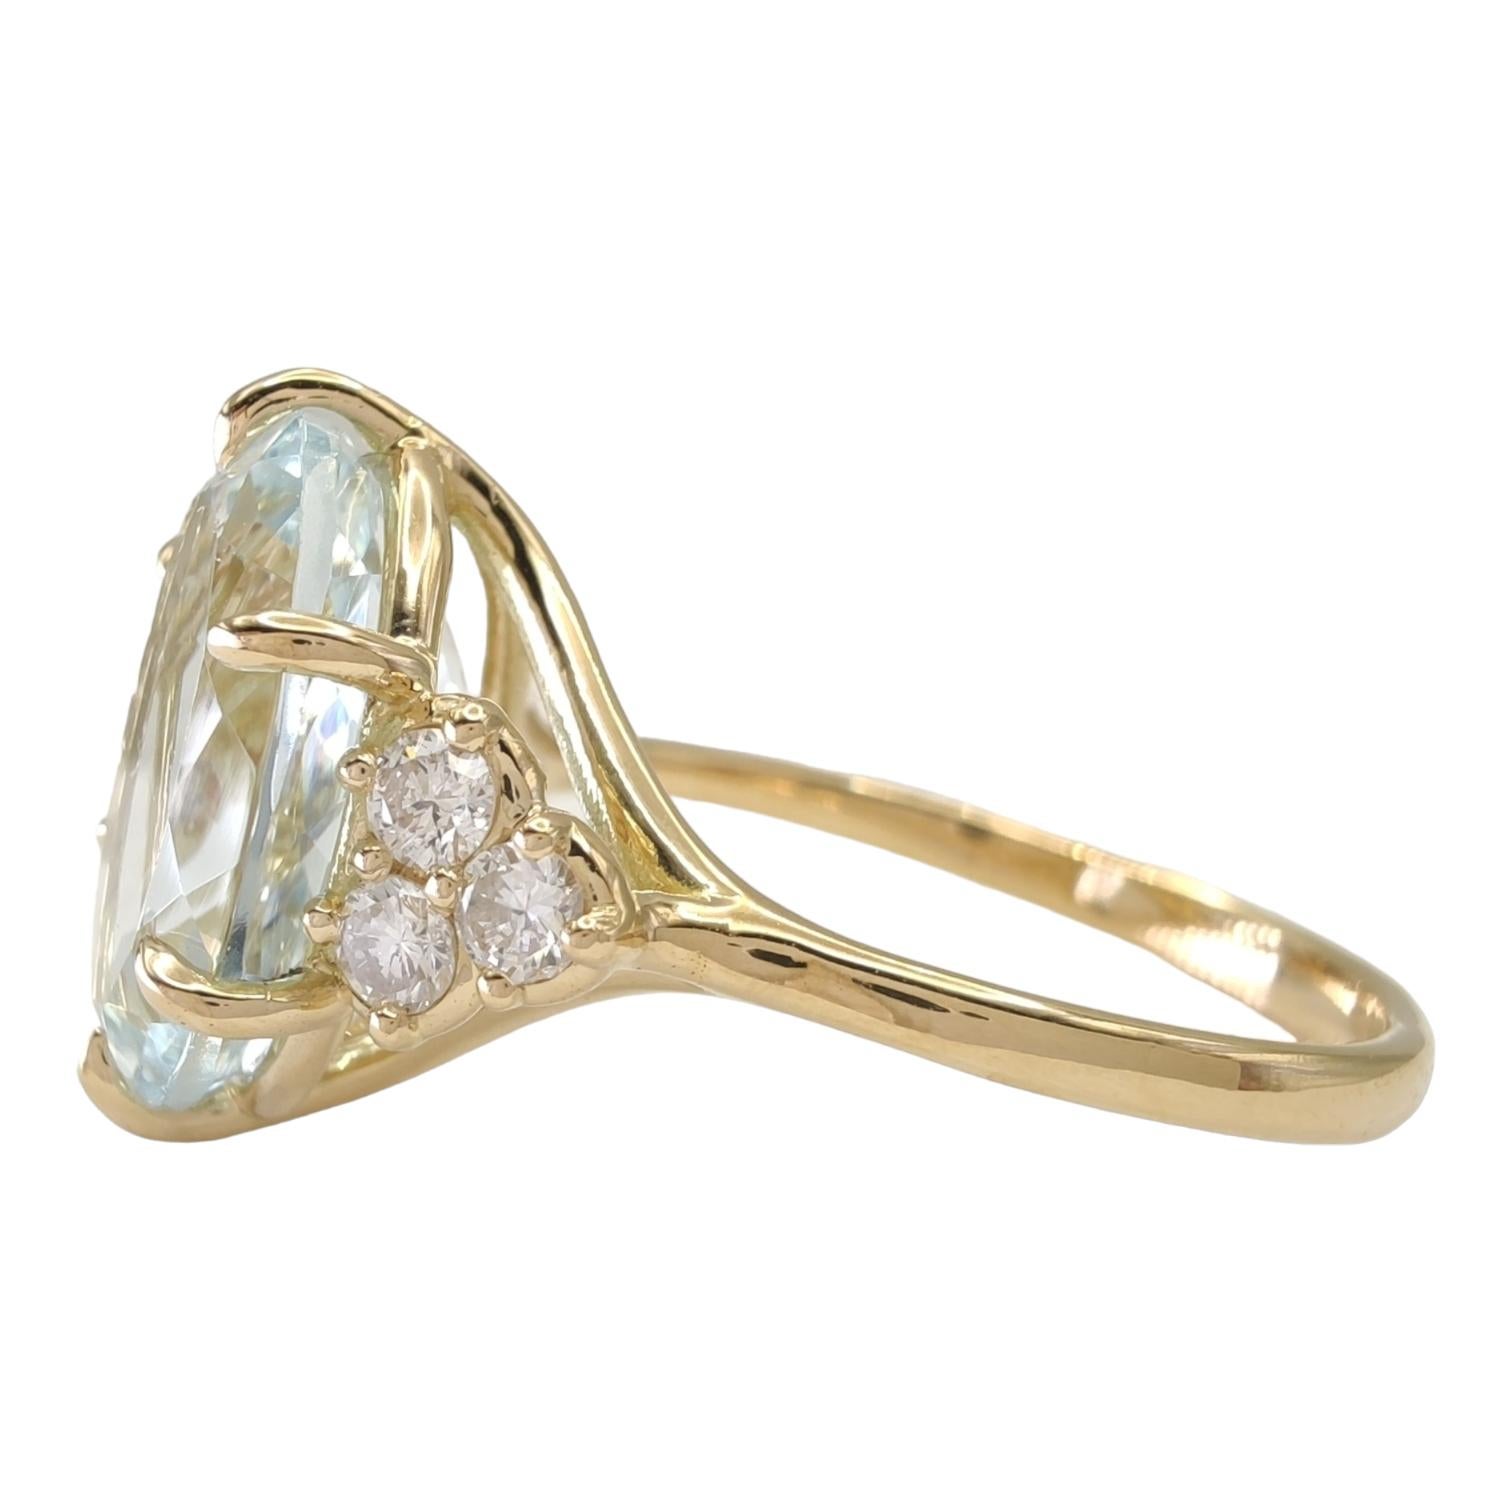 3.9 Carat Oval Cut Aquamarine and 0.24ct Diamond Engagement Ring in 18K Gold For Sale 6